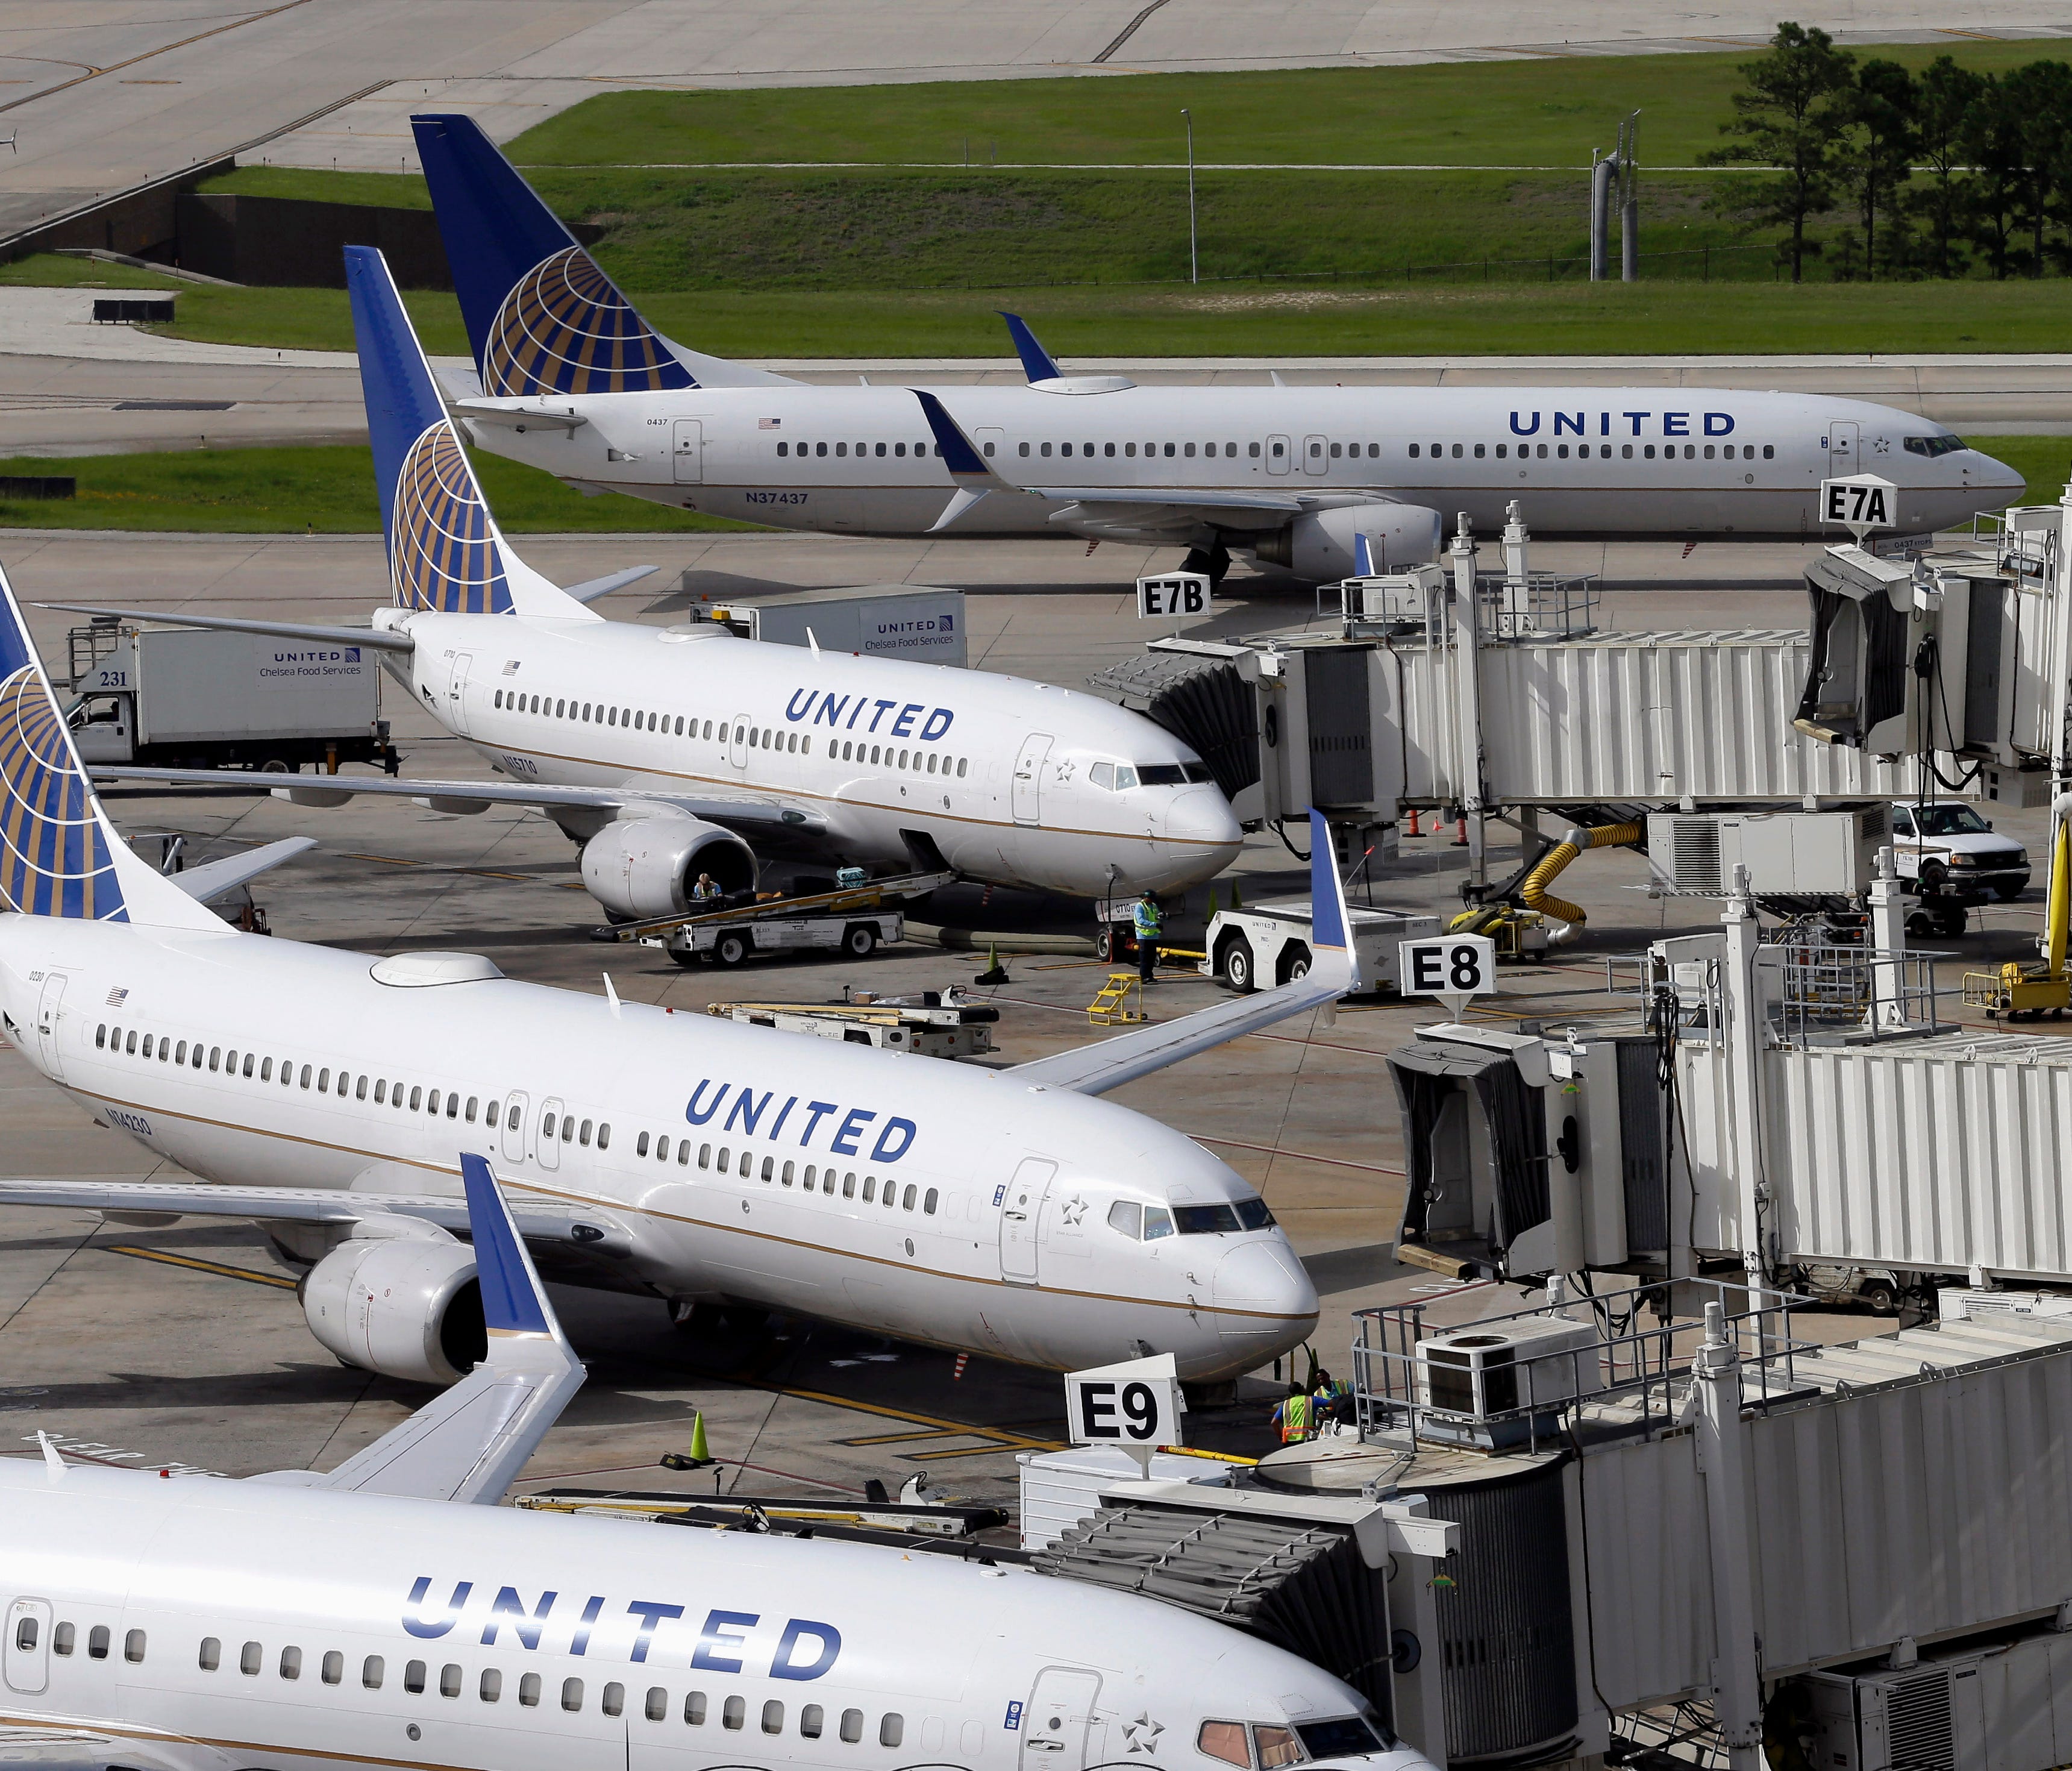 United Airlines planes wait at the gates at Houston George Bush Intercontinental Airport.